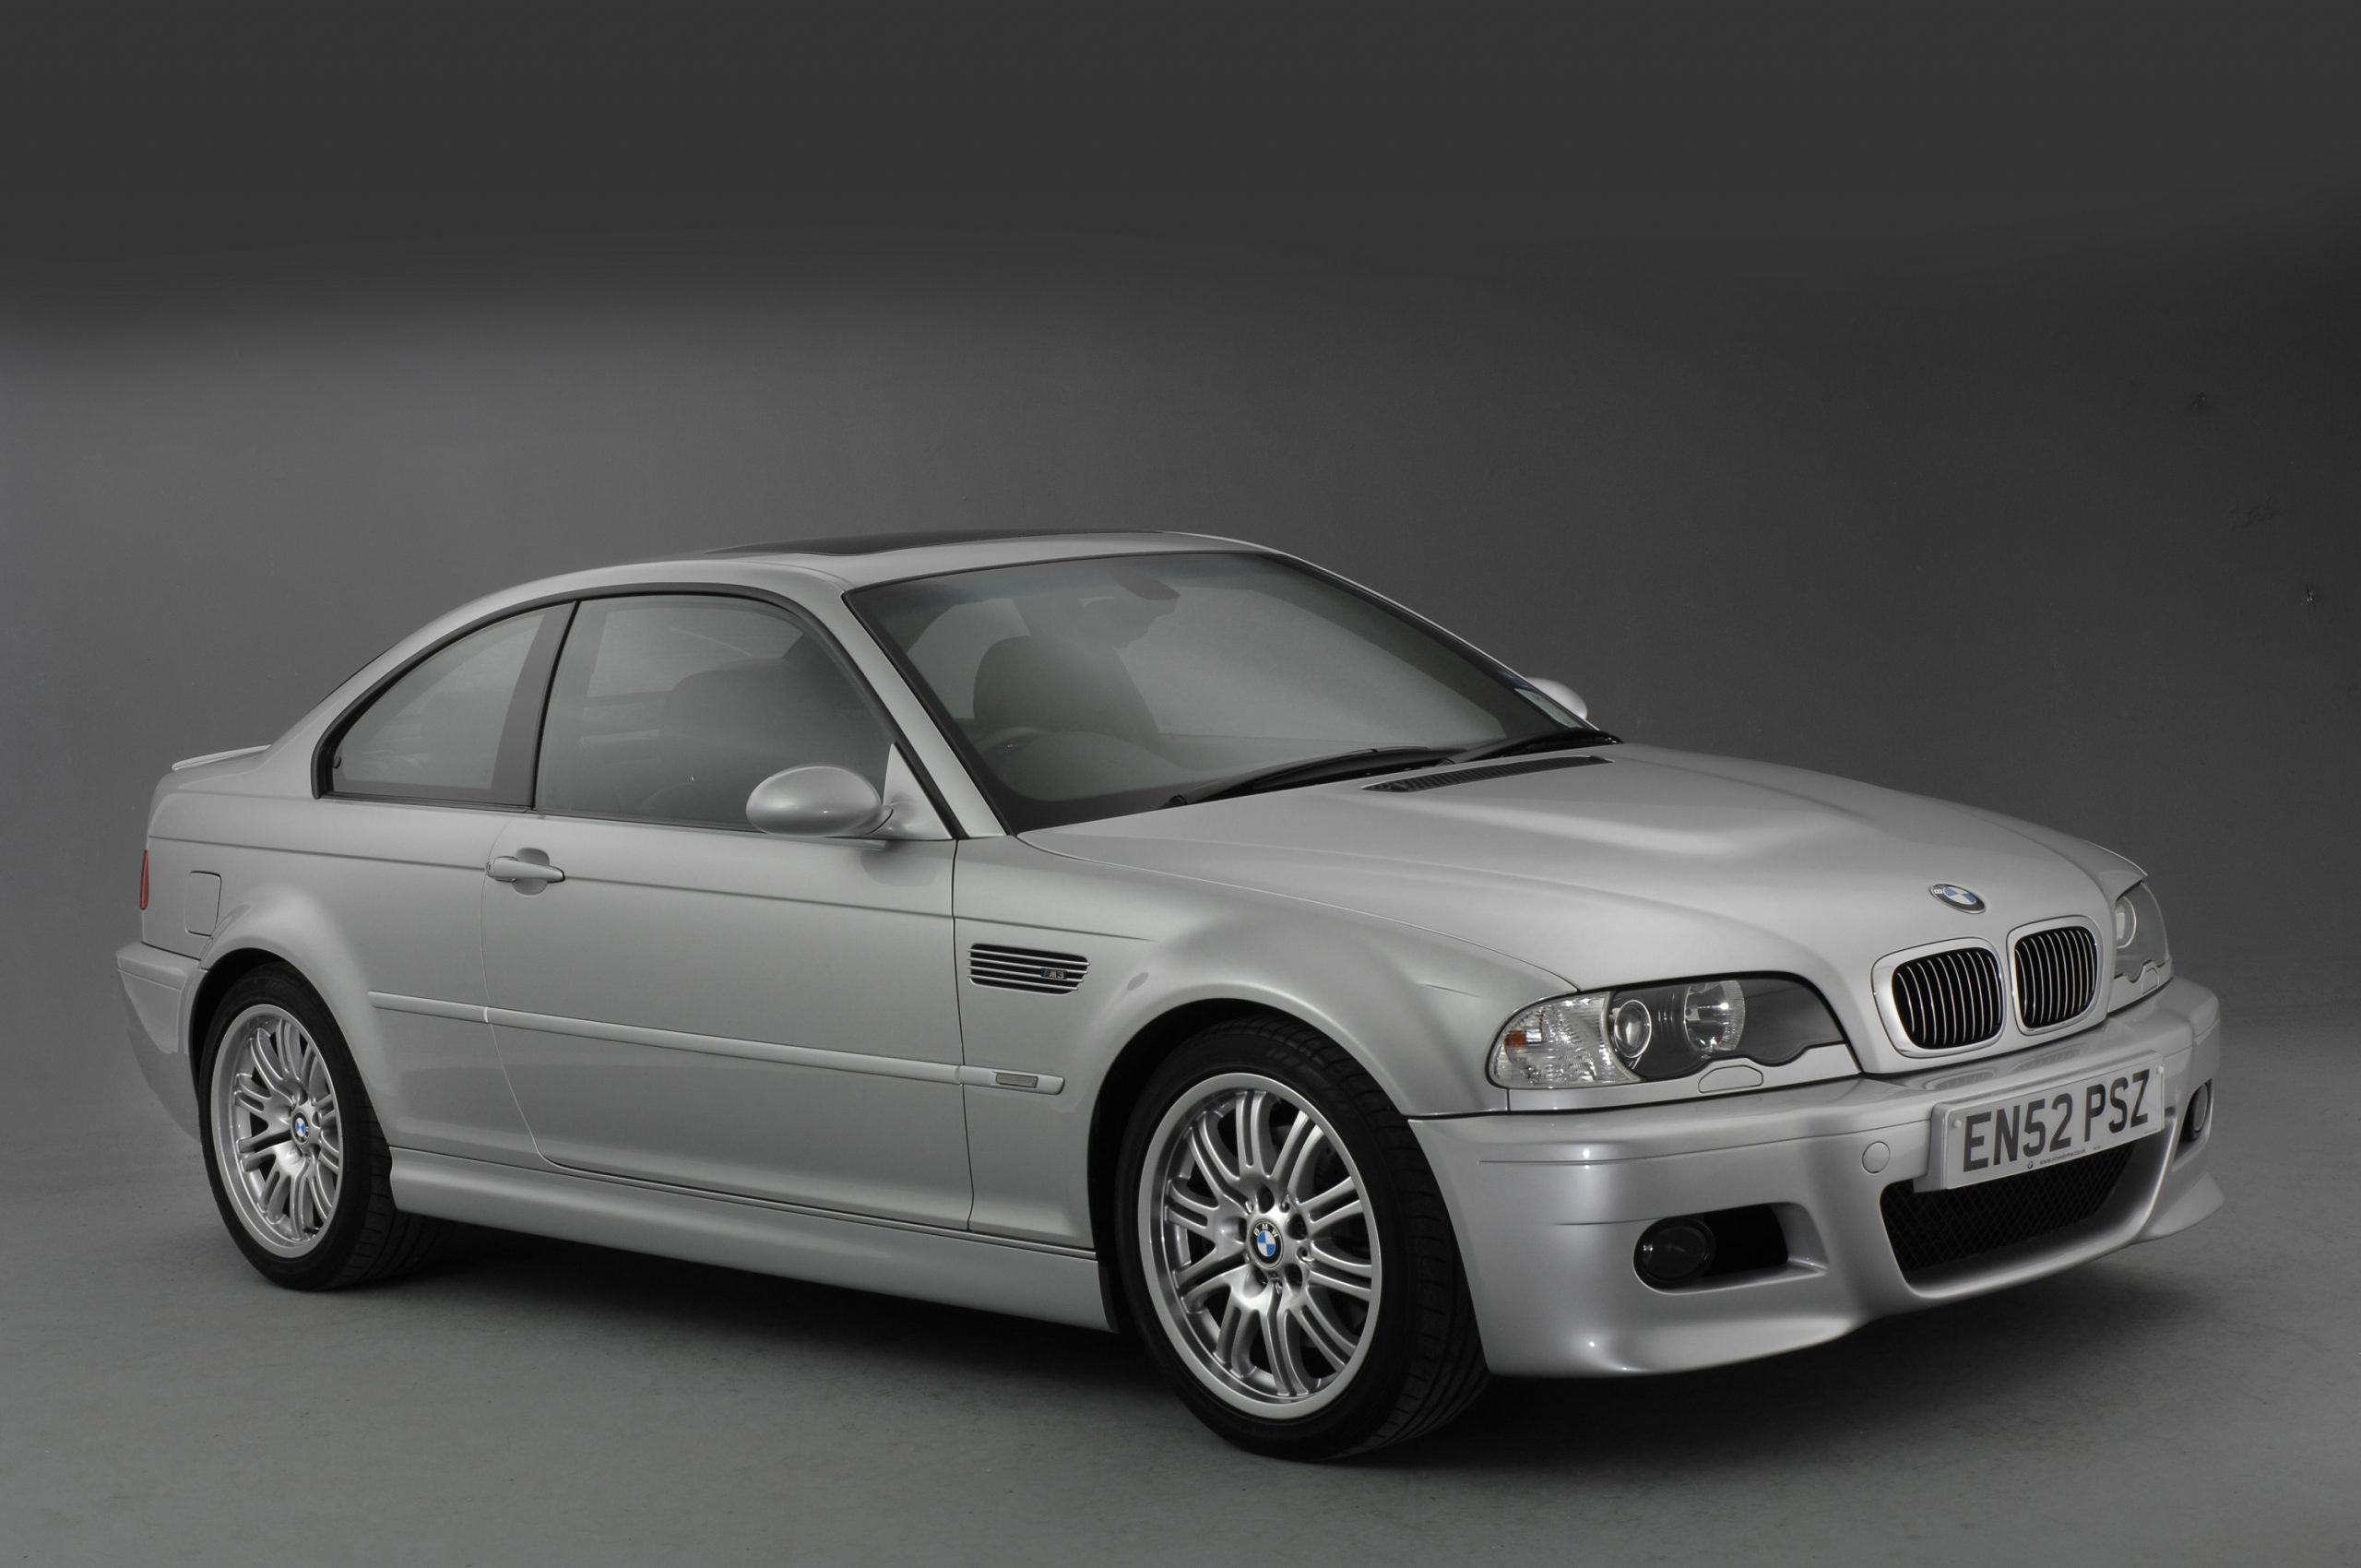 A silver E46 BMW M3 sports car shot from the front 3/4